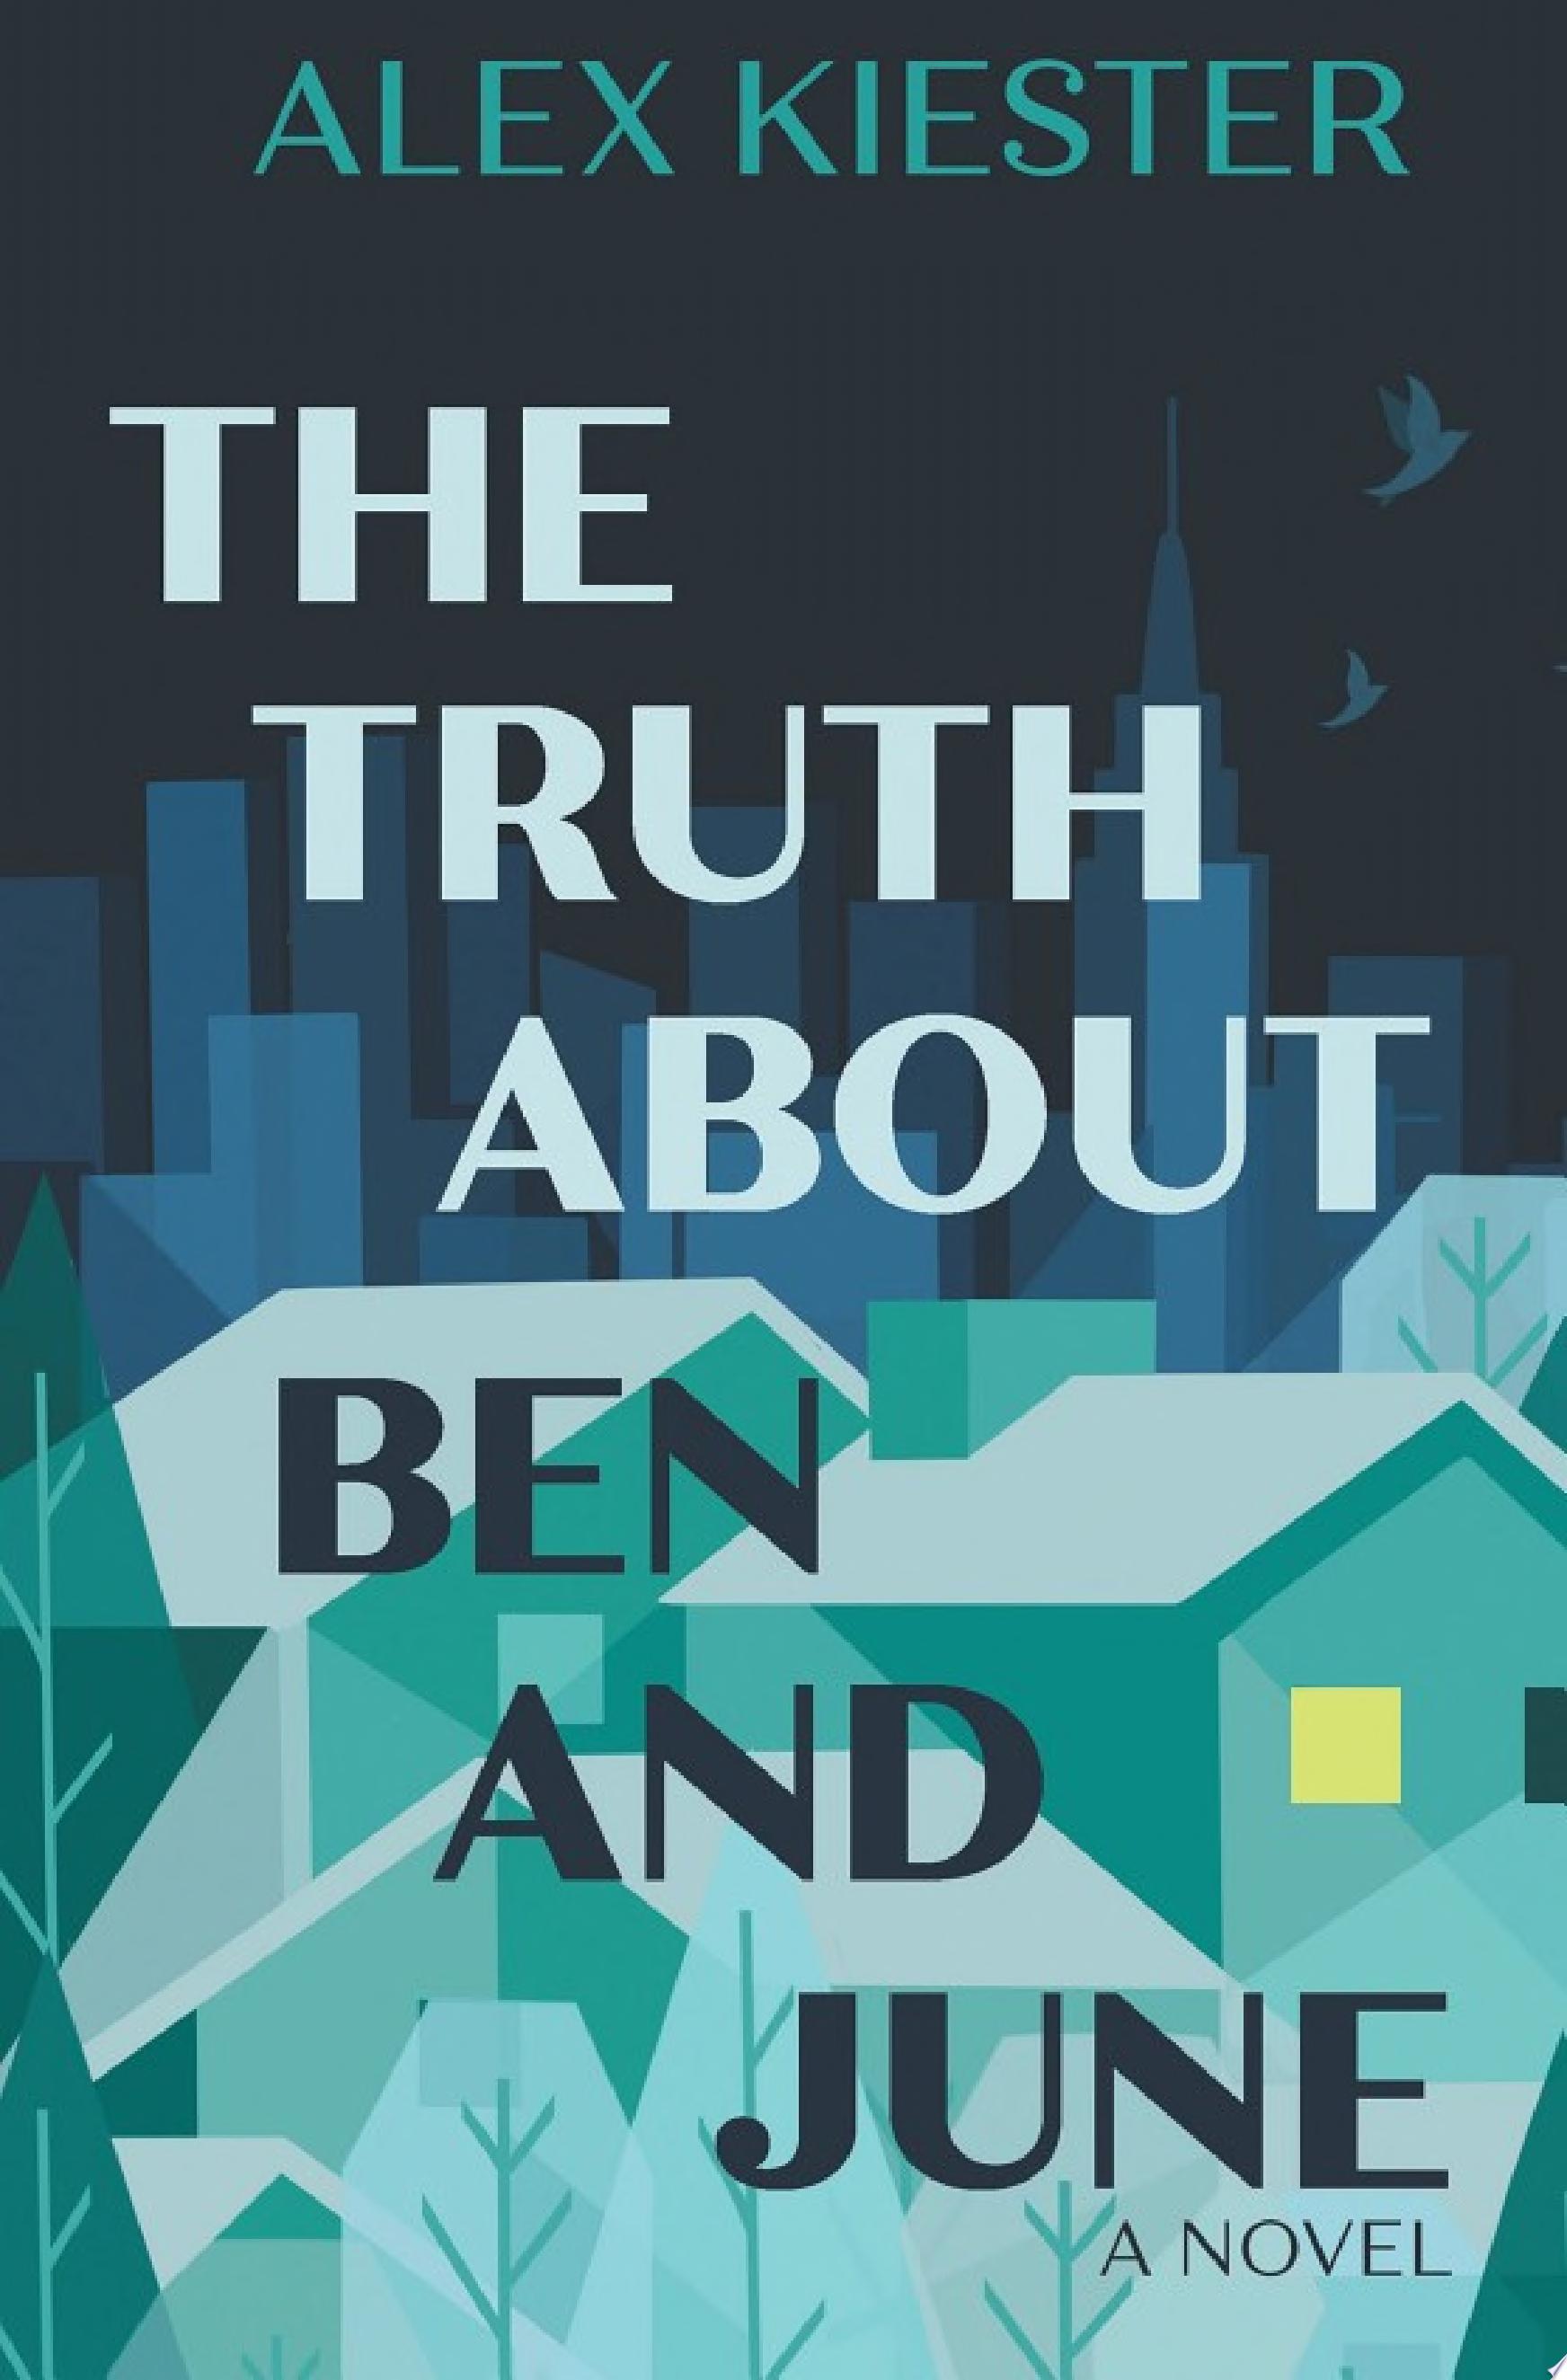 Image for "The Truth About Ben and June"